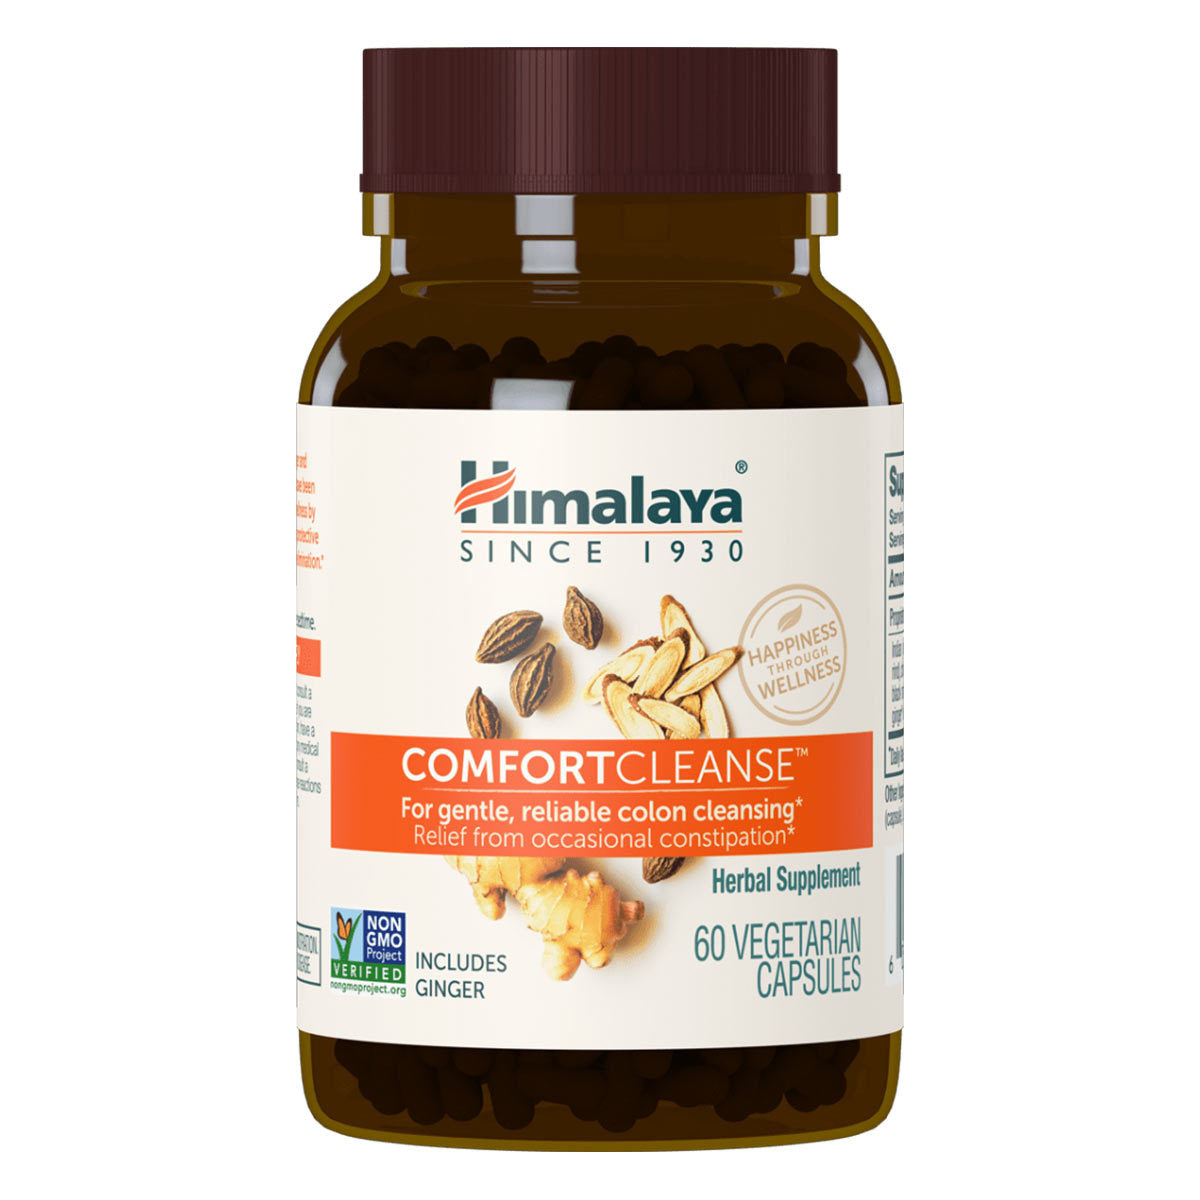 Primary image of ComfortCleanse